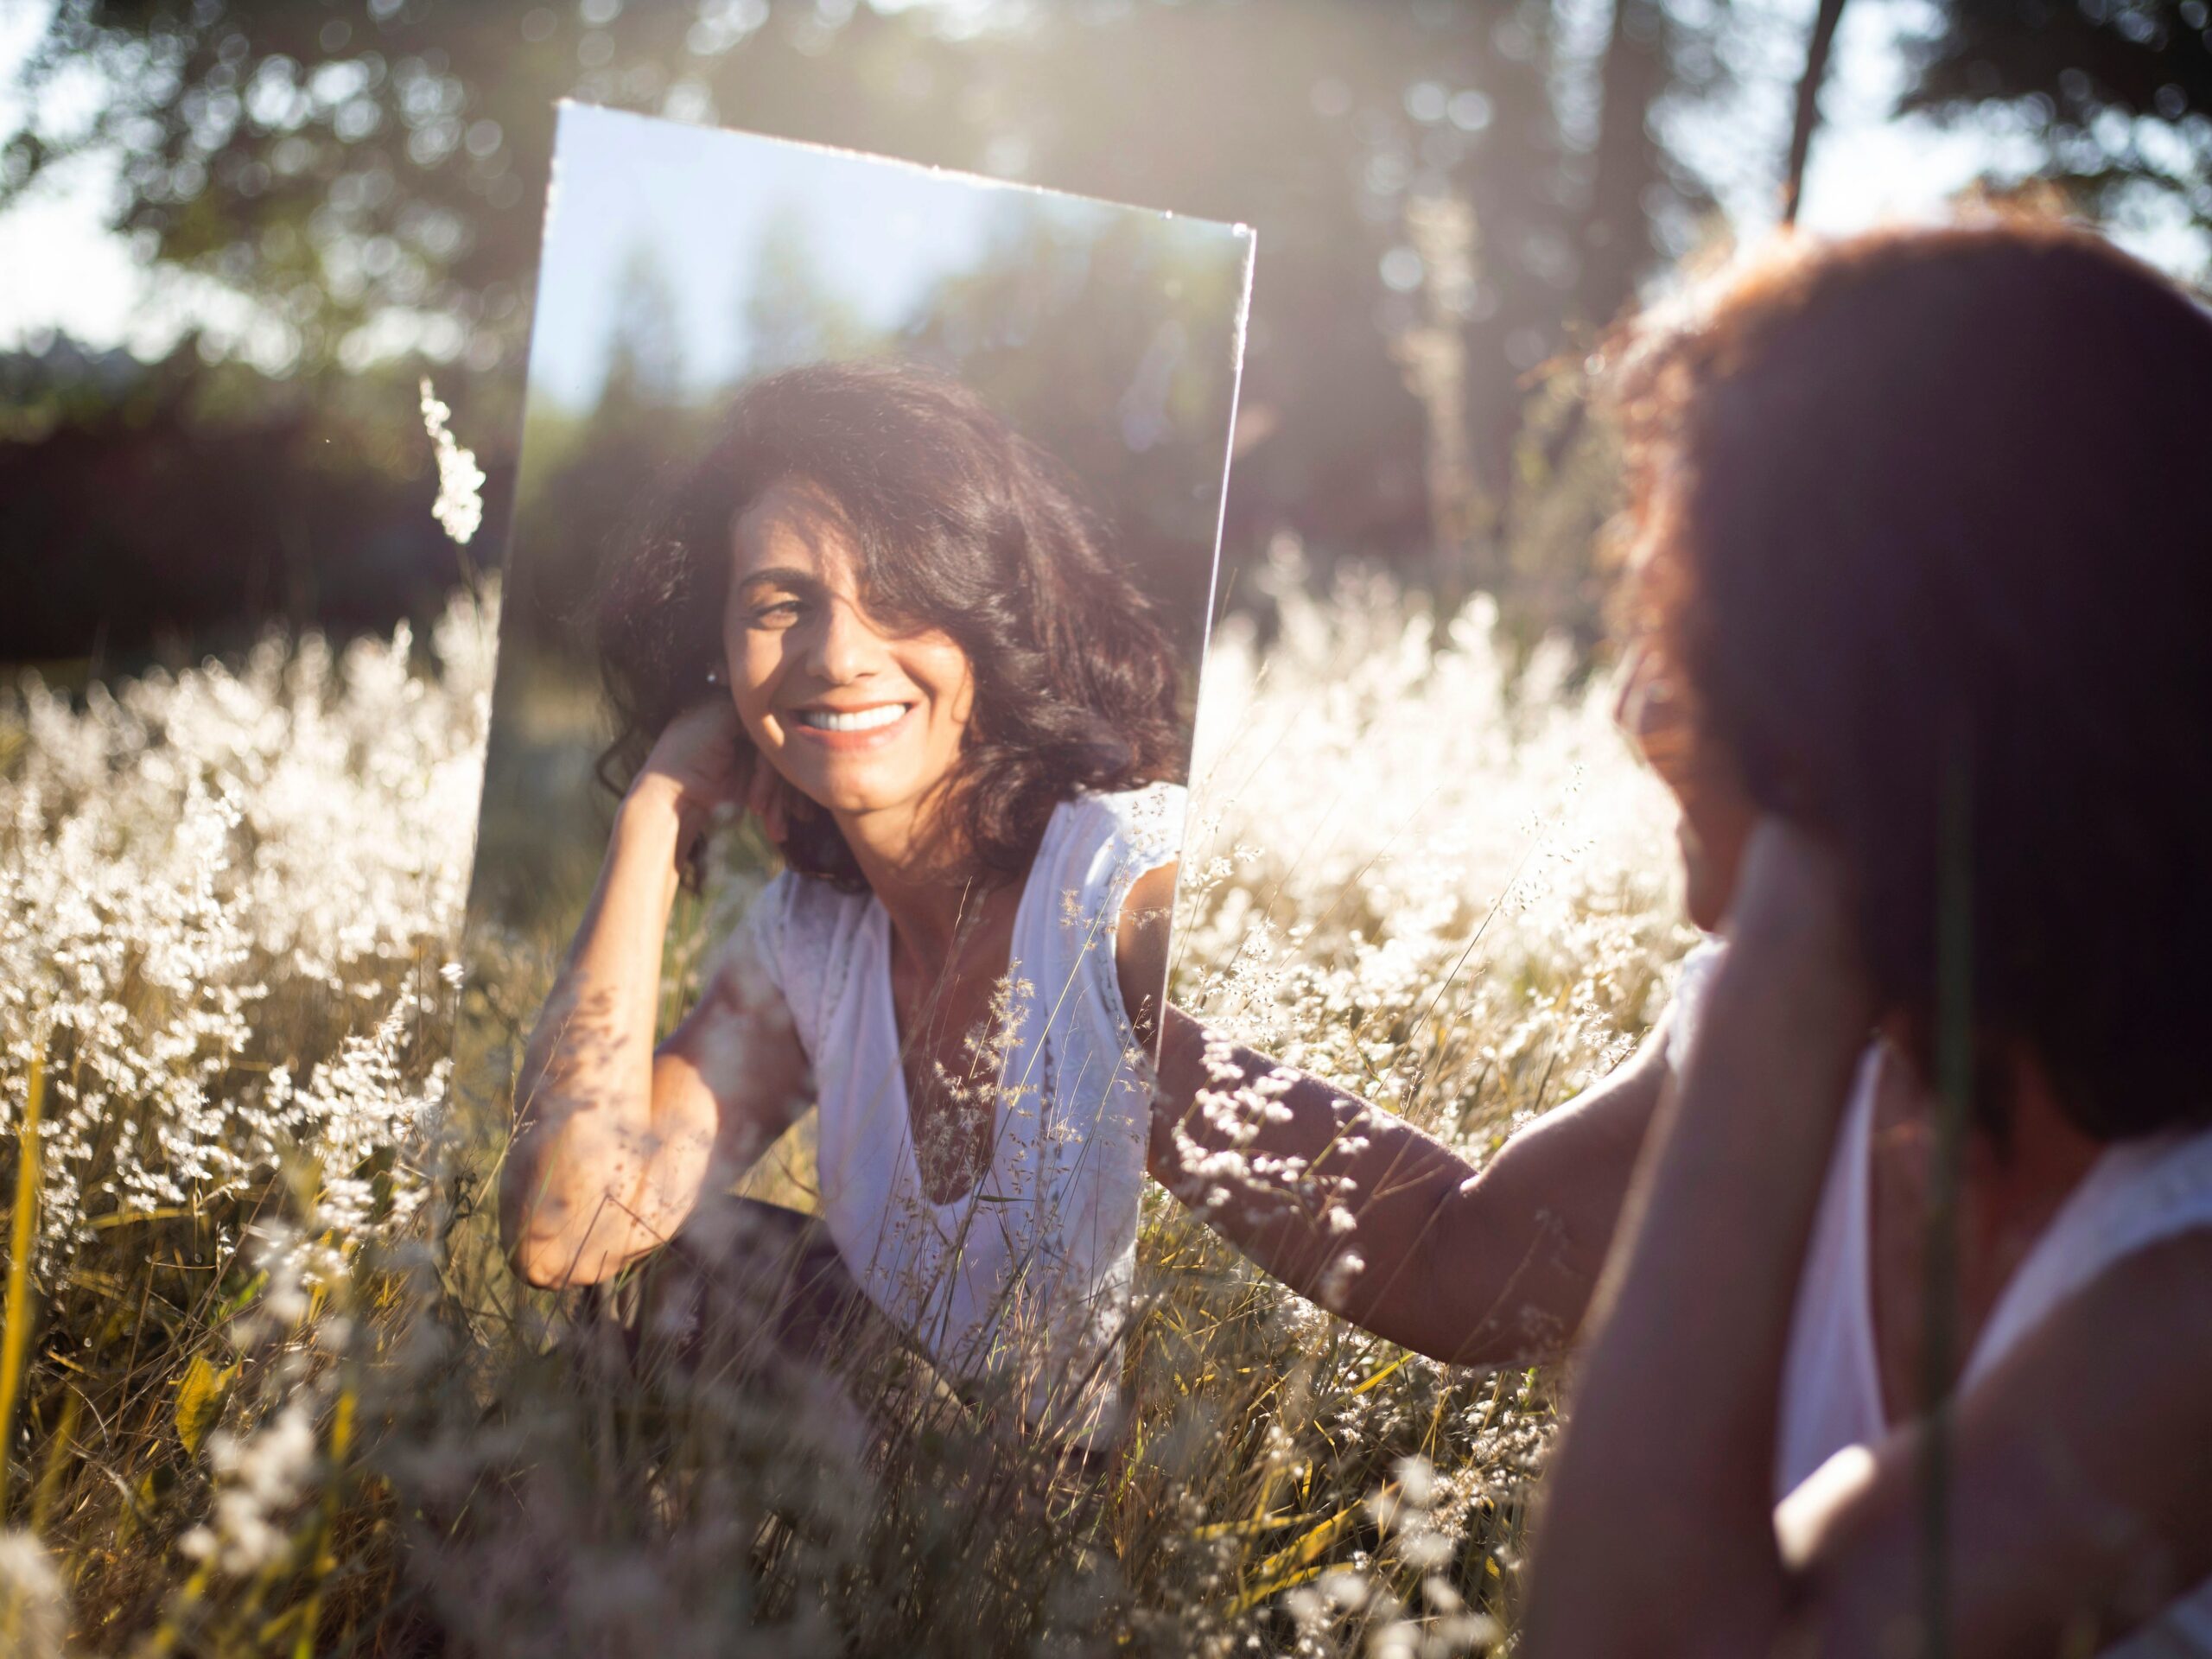 a woman looking at herself in the mirror and smiling, siting in a field, used for article tips for productivity